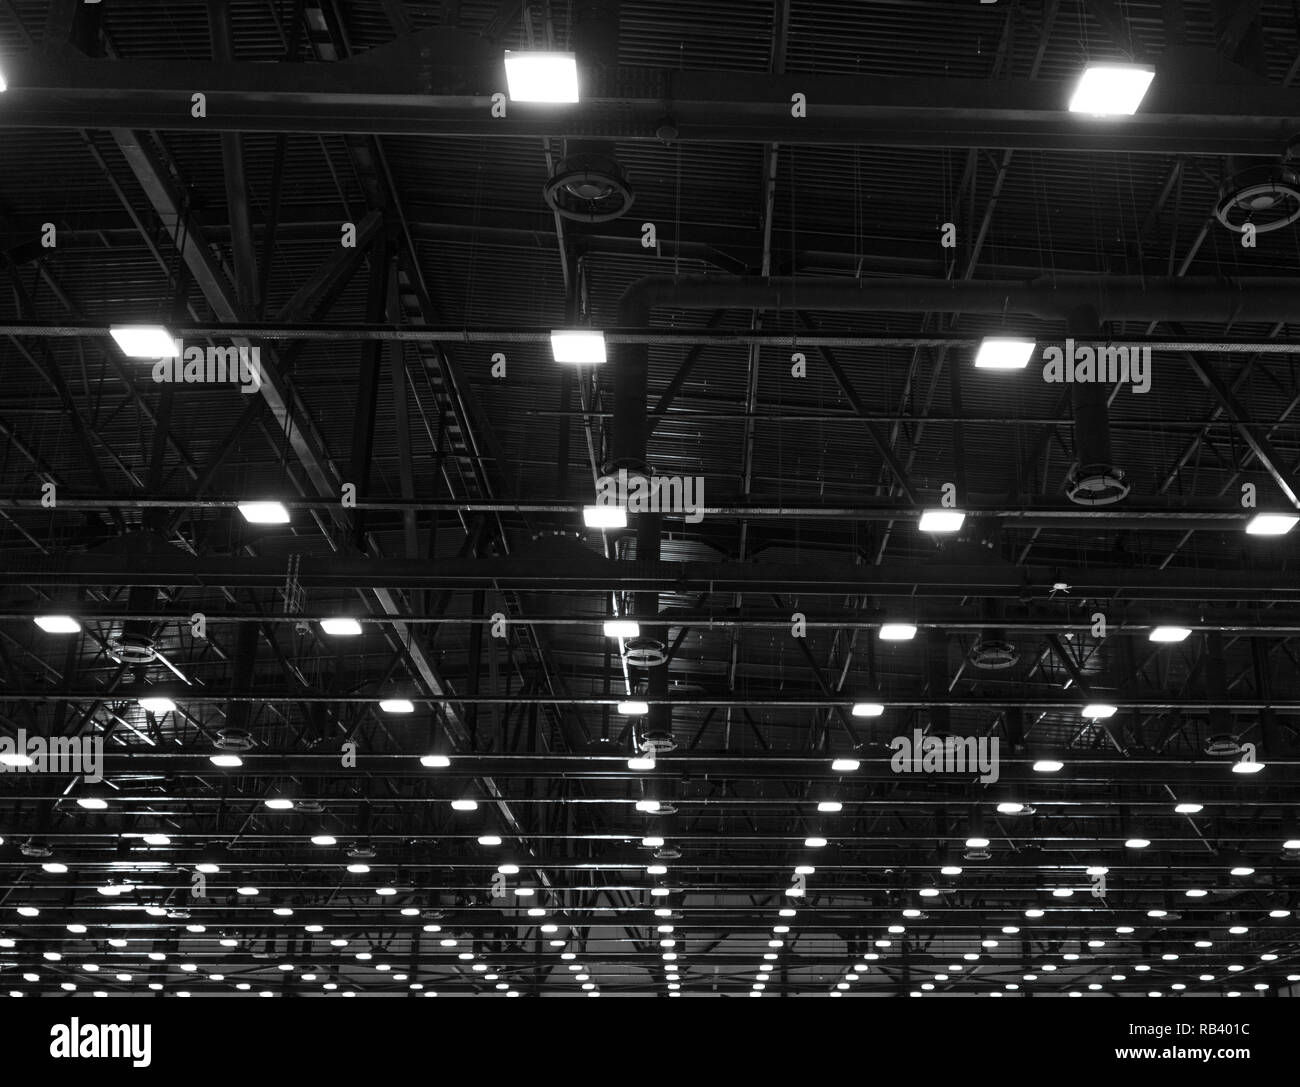 Lights And Ventilation System In Long Line On Ceiling Of The Dark